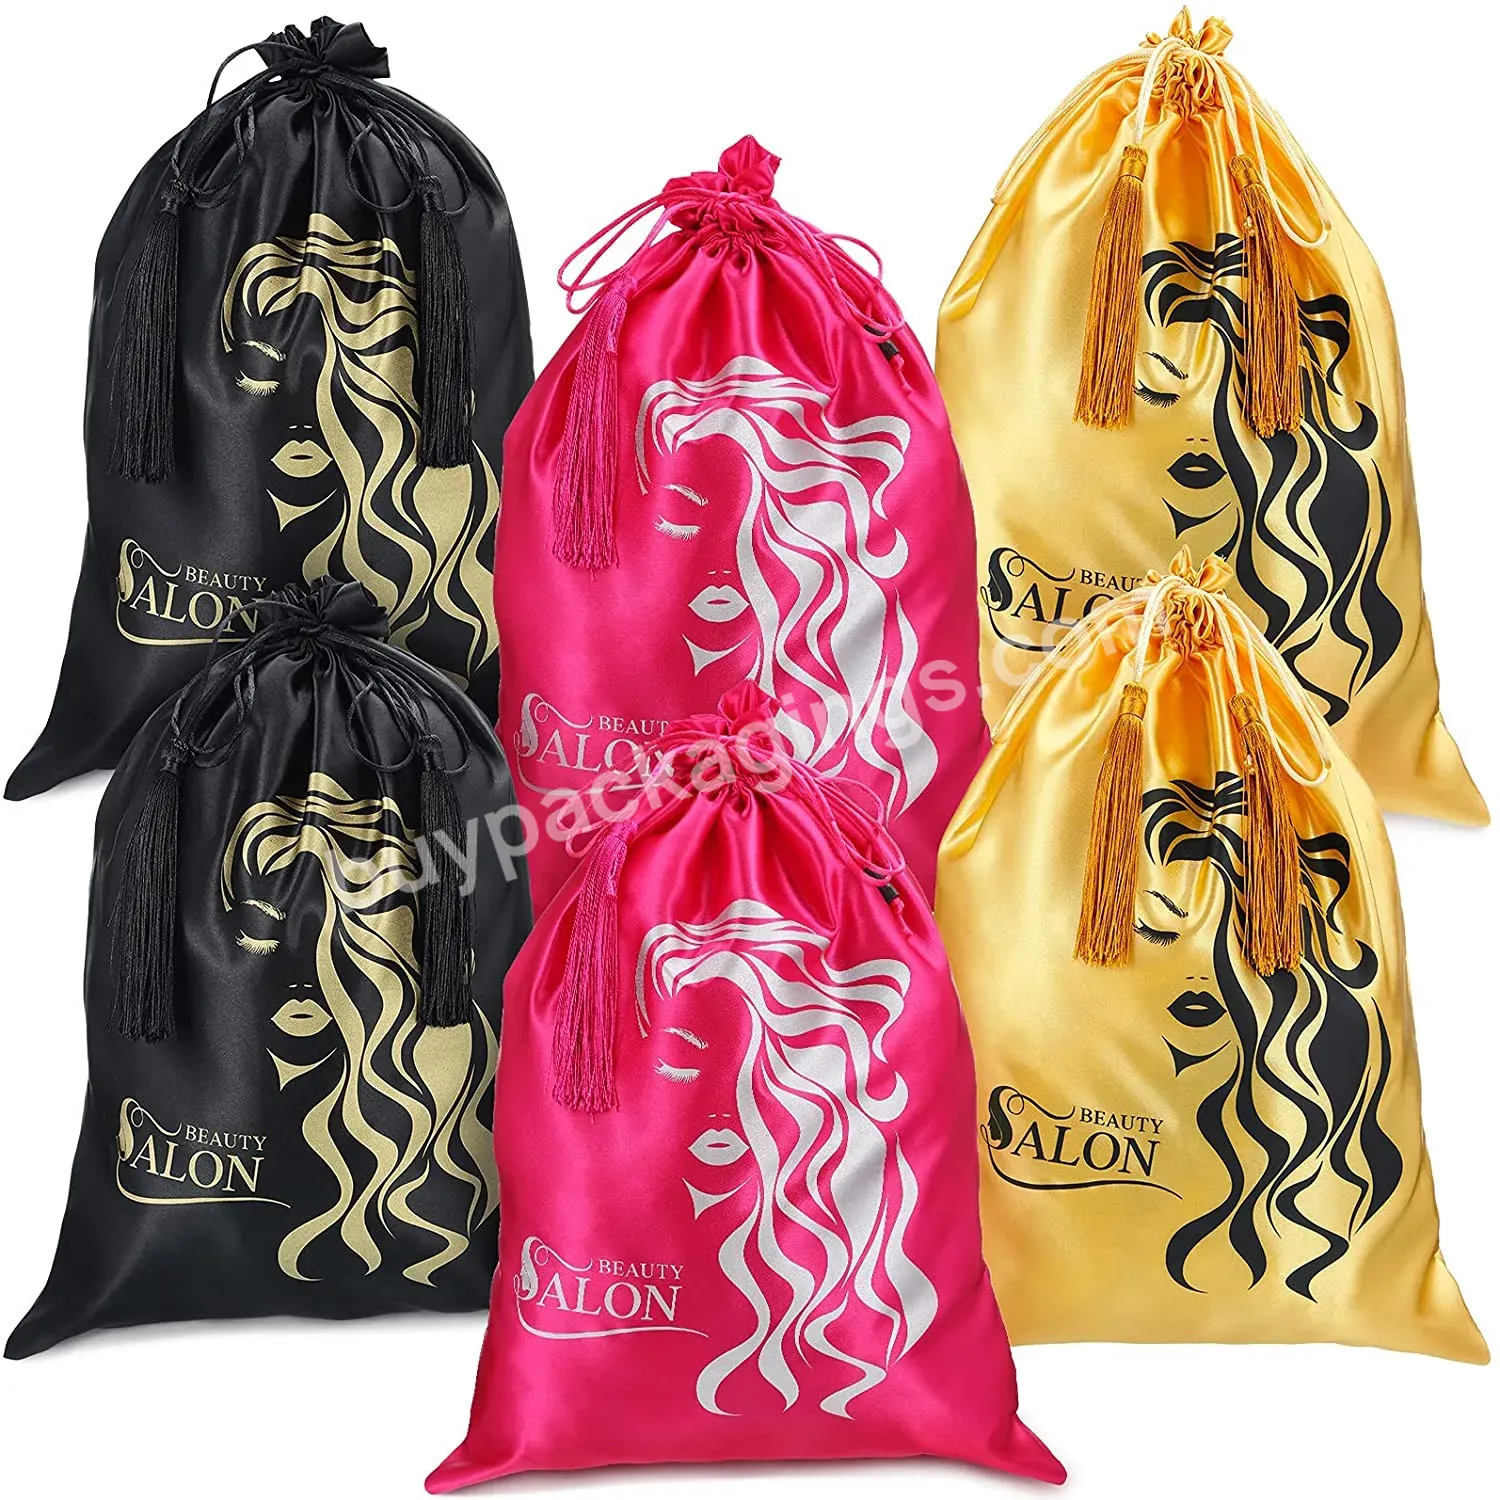 Logo Custom Satin Bags Silk Bags With Drawstring For Hair Extension Human Hair Bundles Wigs Other Hair Styling Tools Travel Bags